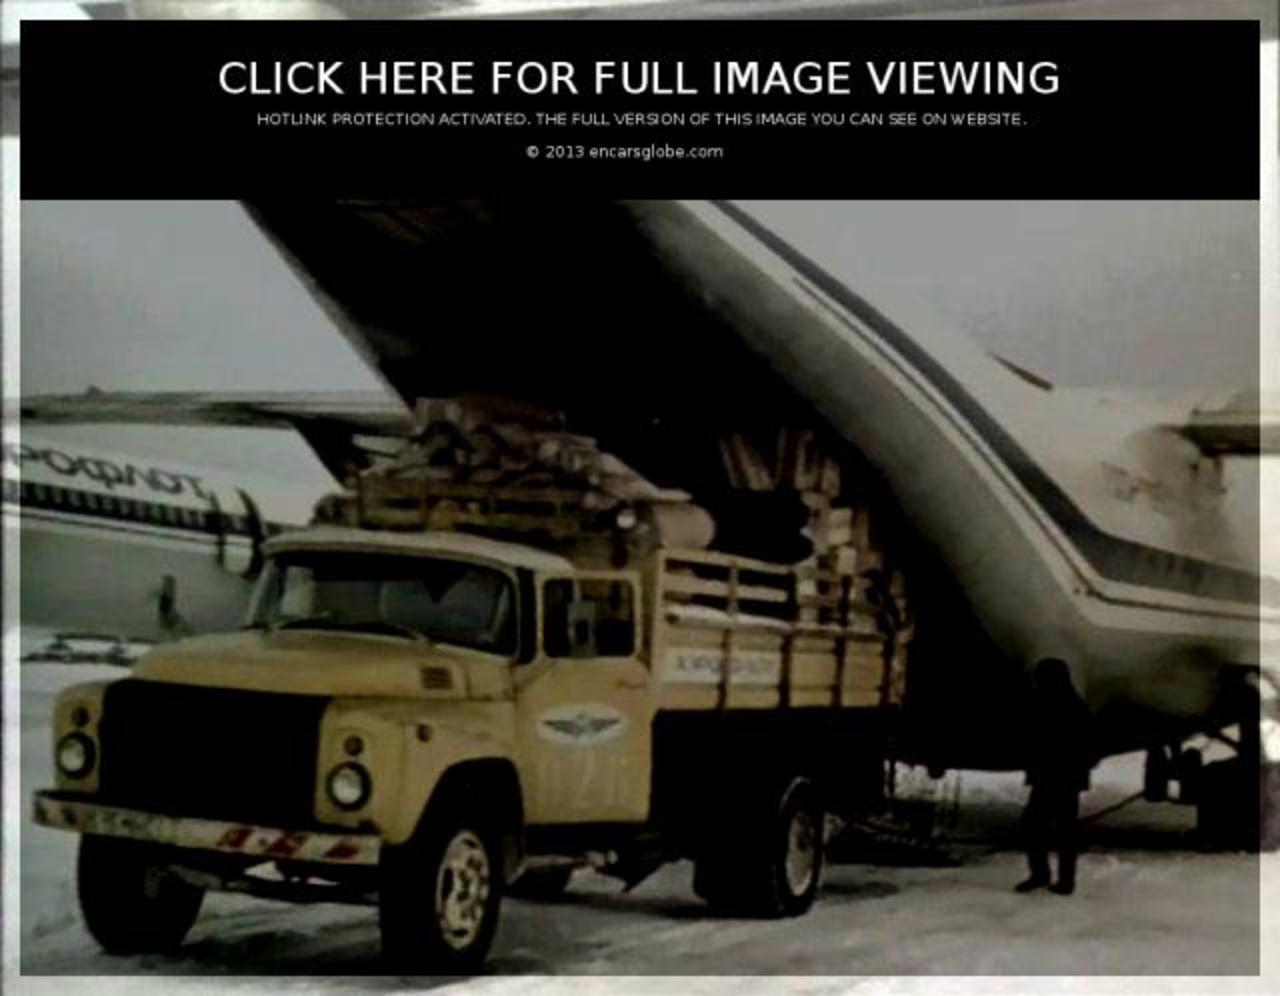 ZiL ZIL-130-80 Photo Gallery: Photo #10 out of 11, Image Size ...